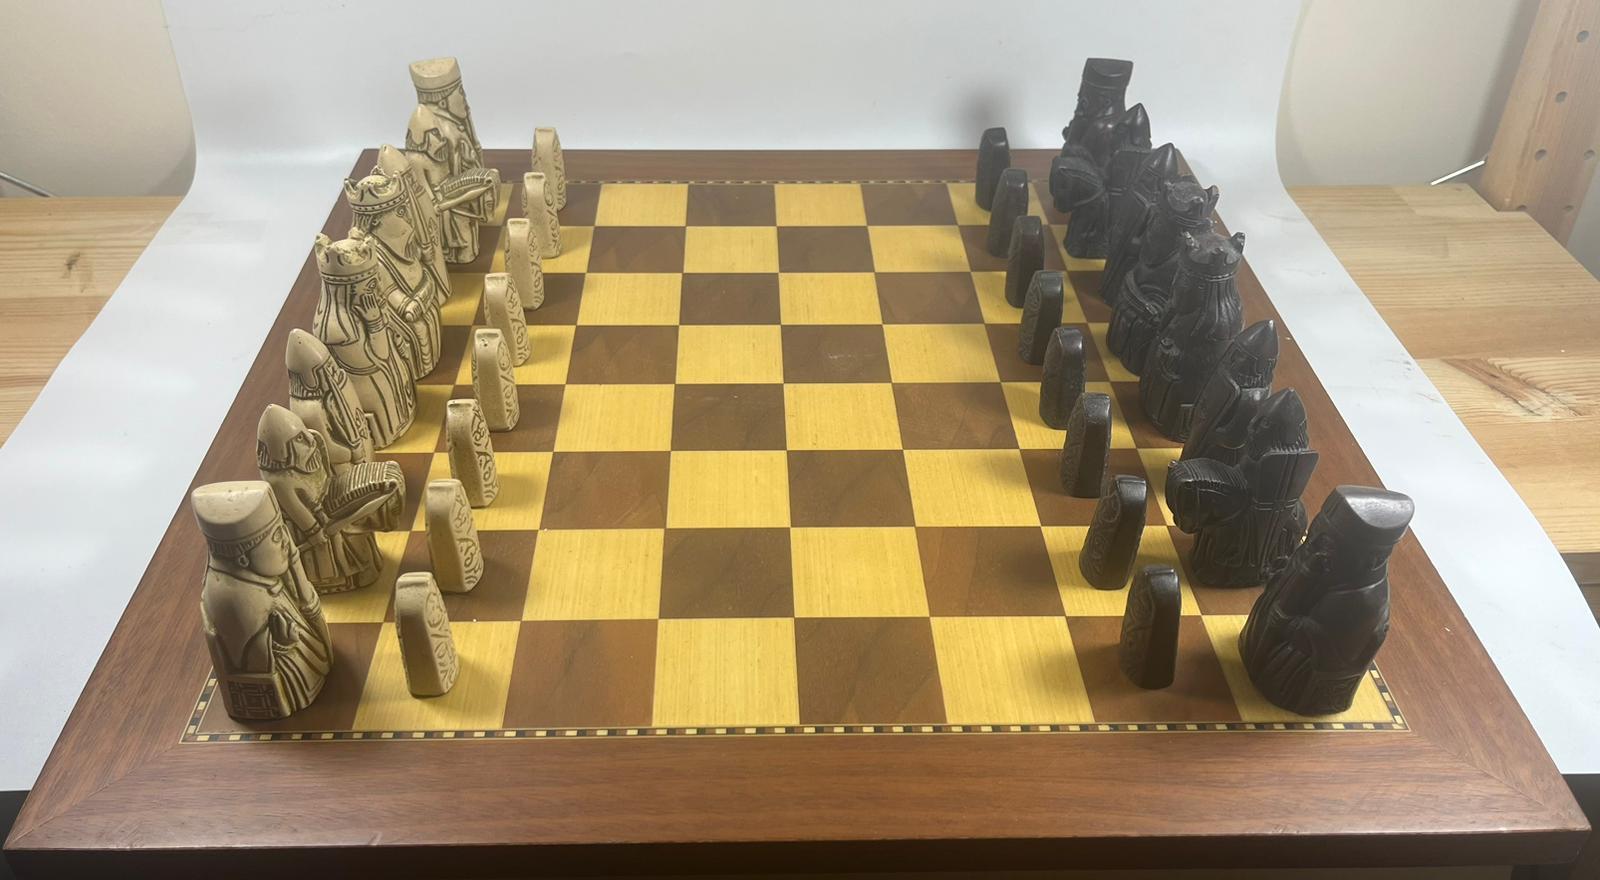 A VINTAGE LEWIS CHESSMEN CHESS SET MODELLED AS MEDIEVAL FIGURES ON AN INLAID WOODEN BOARD, KING - Image 3 of 5